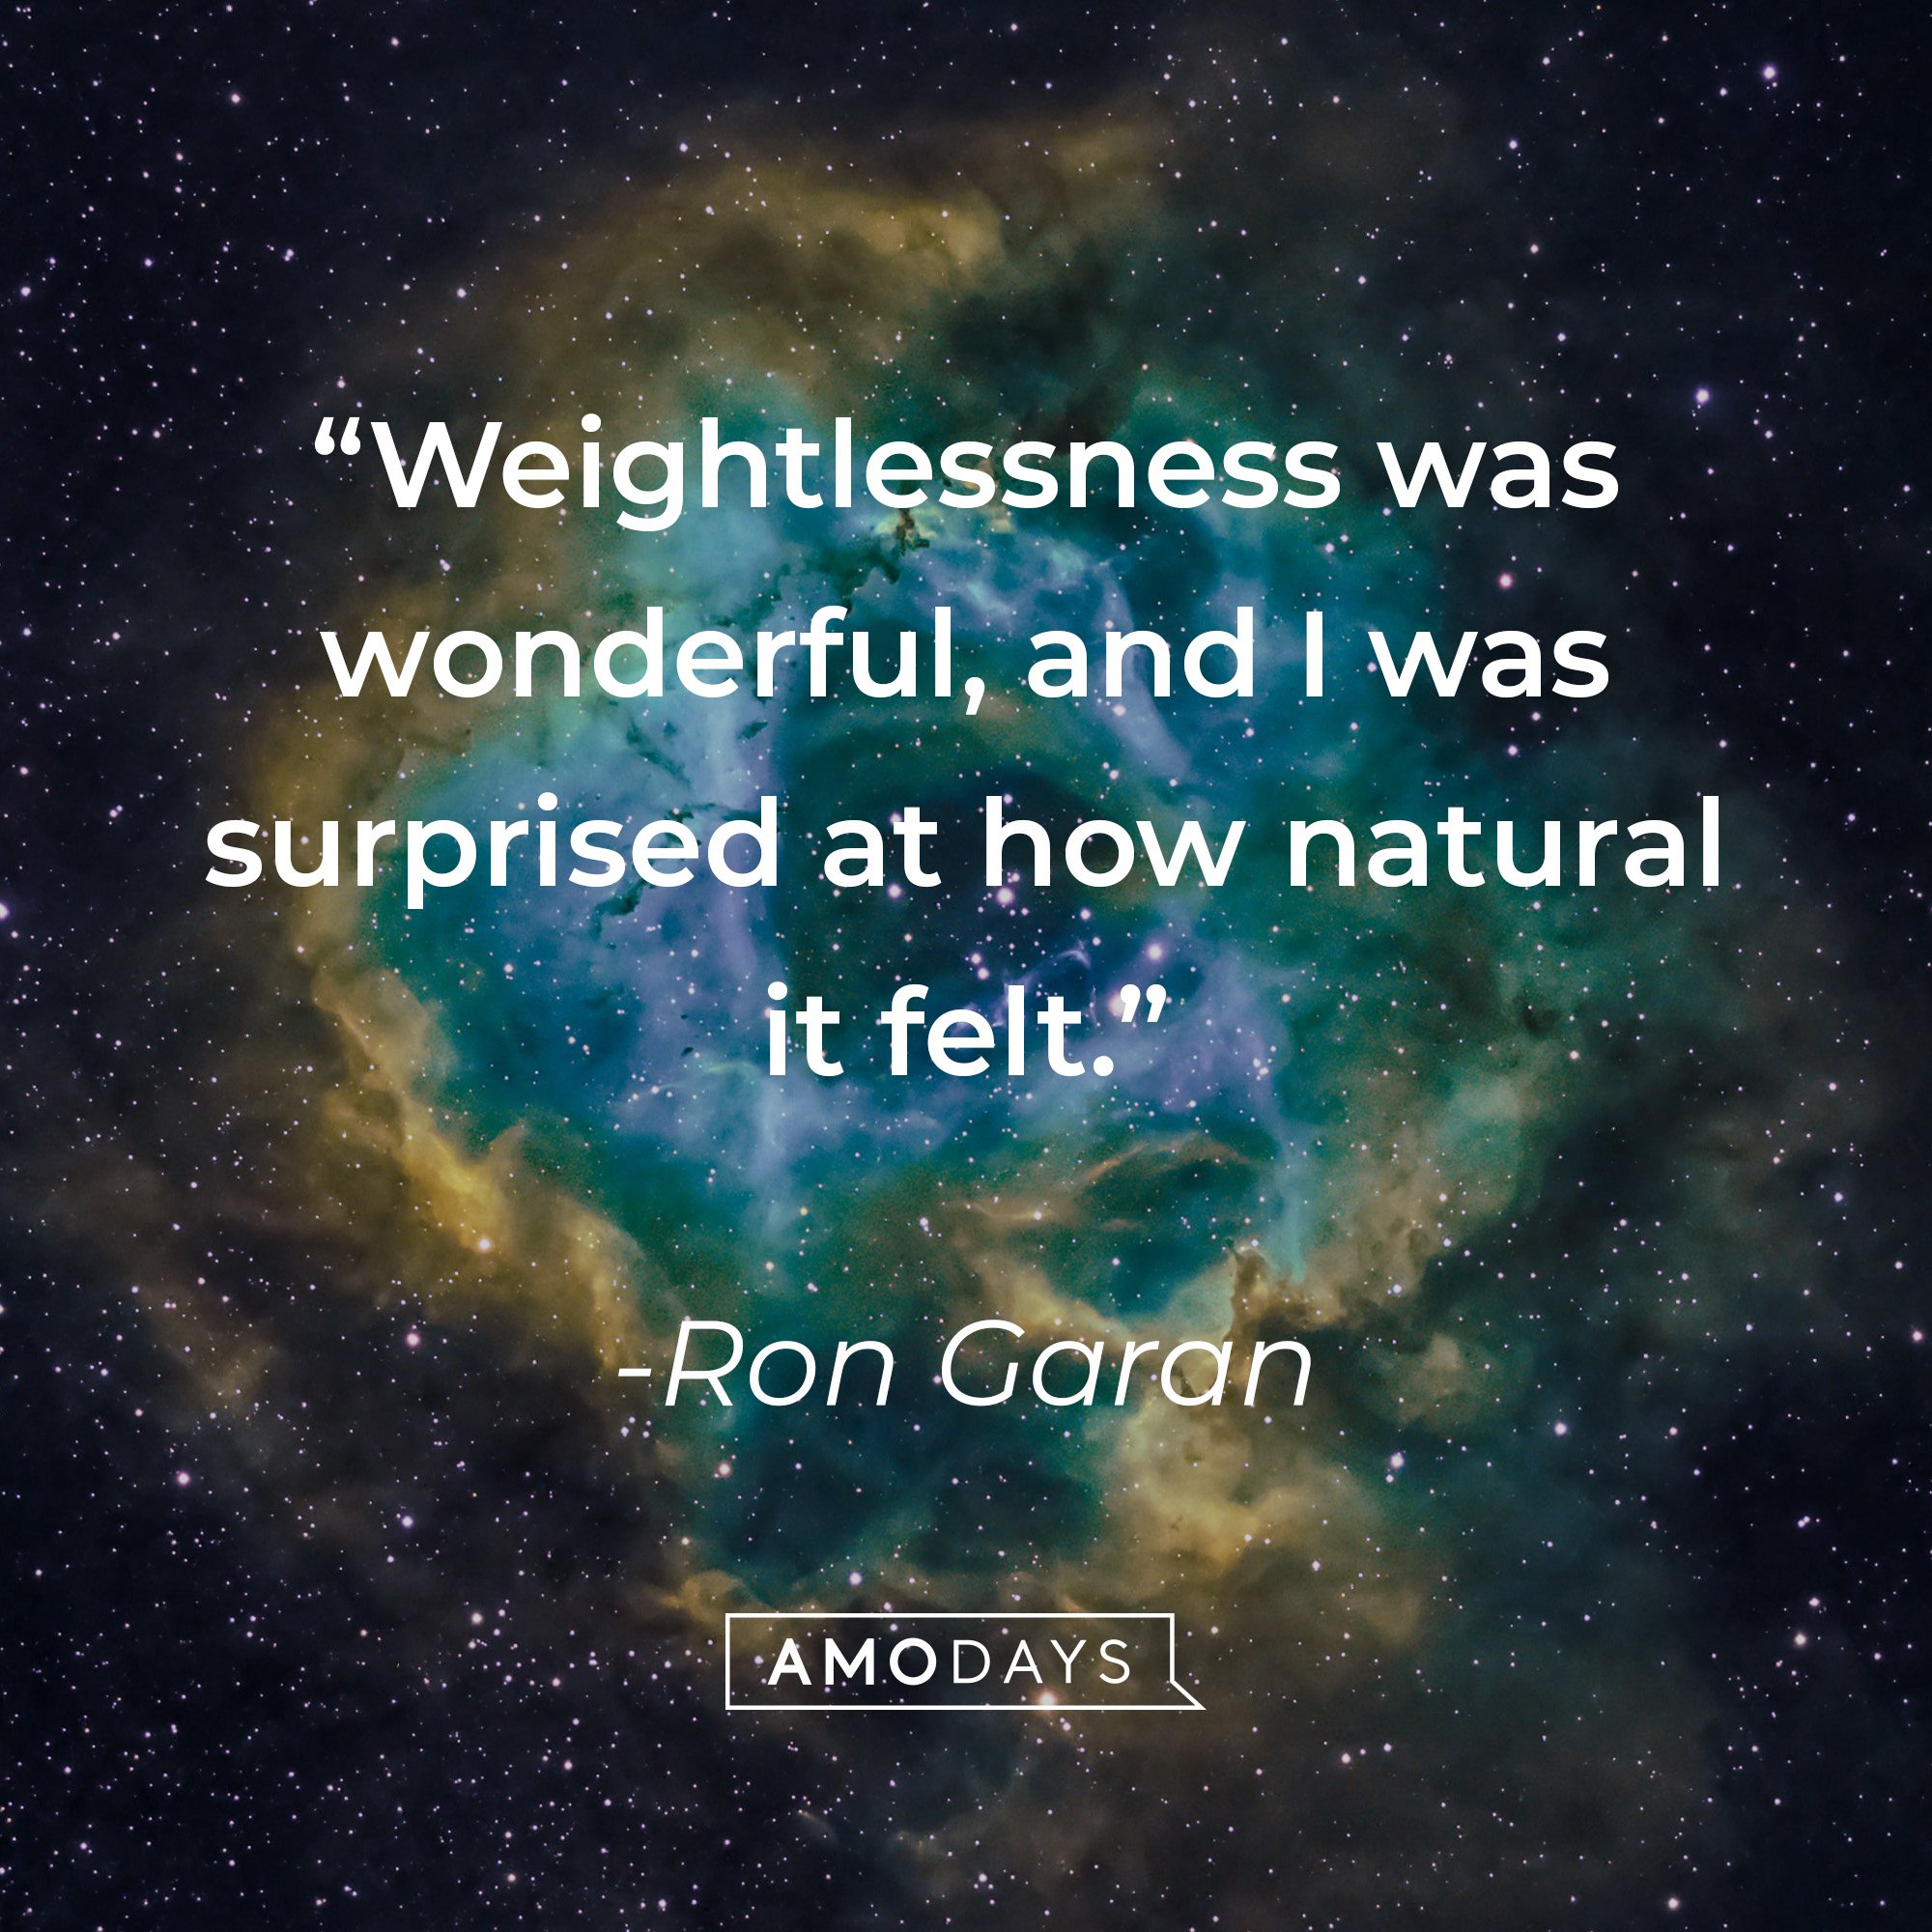 Ron Garan’s quote: “Weightlessness was wonderful, and I was surprised at how natural it felt.” | Image: AmoDays